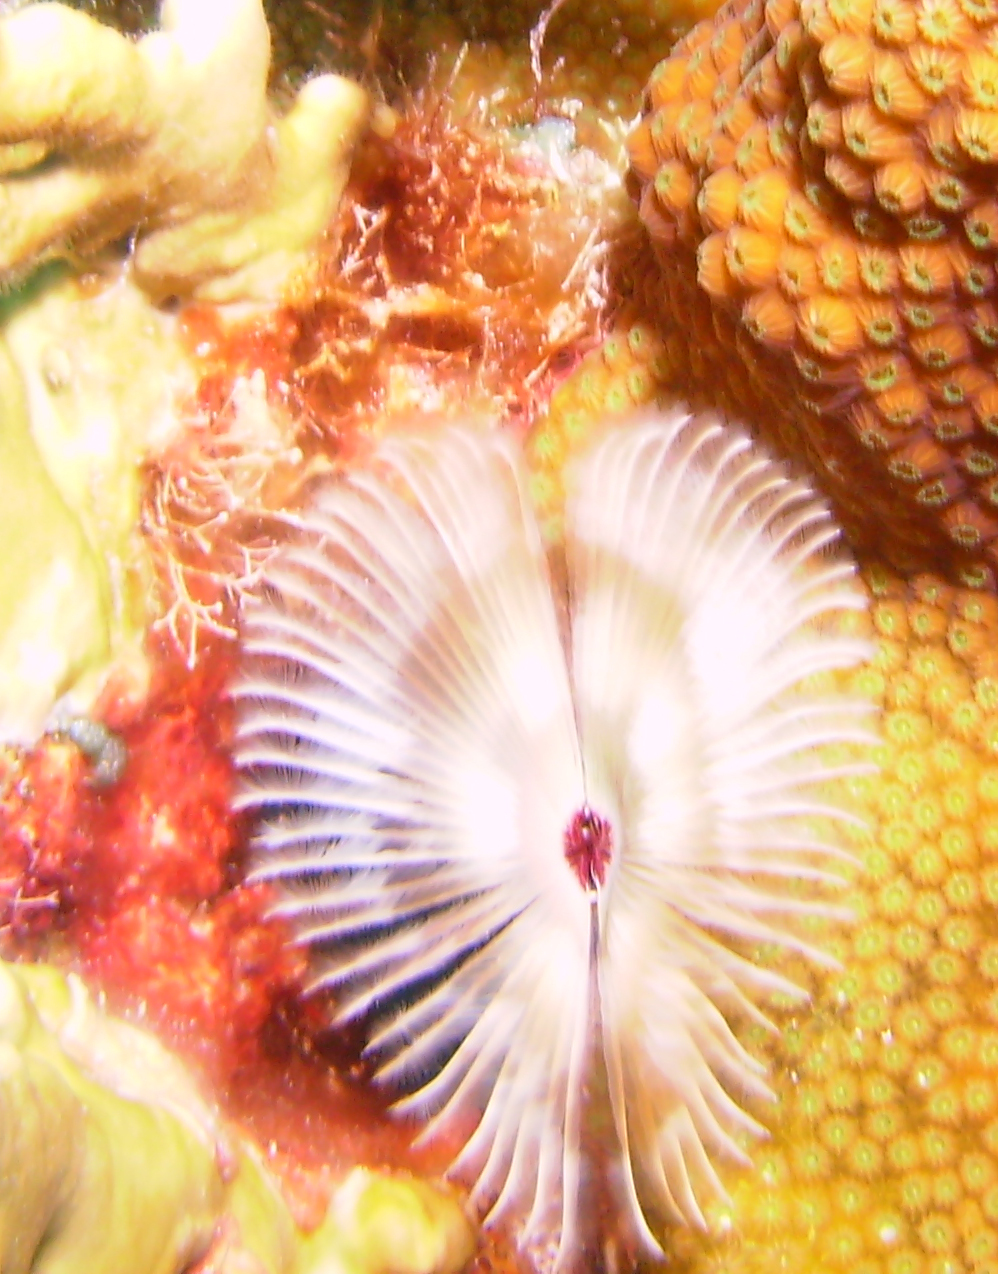 feather duster worm